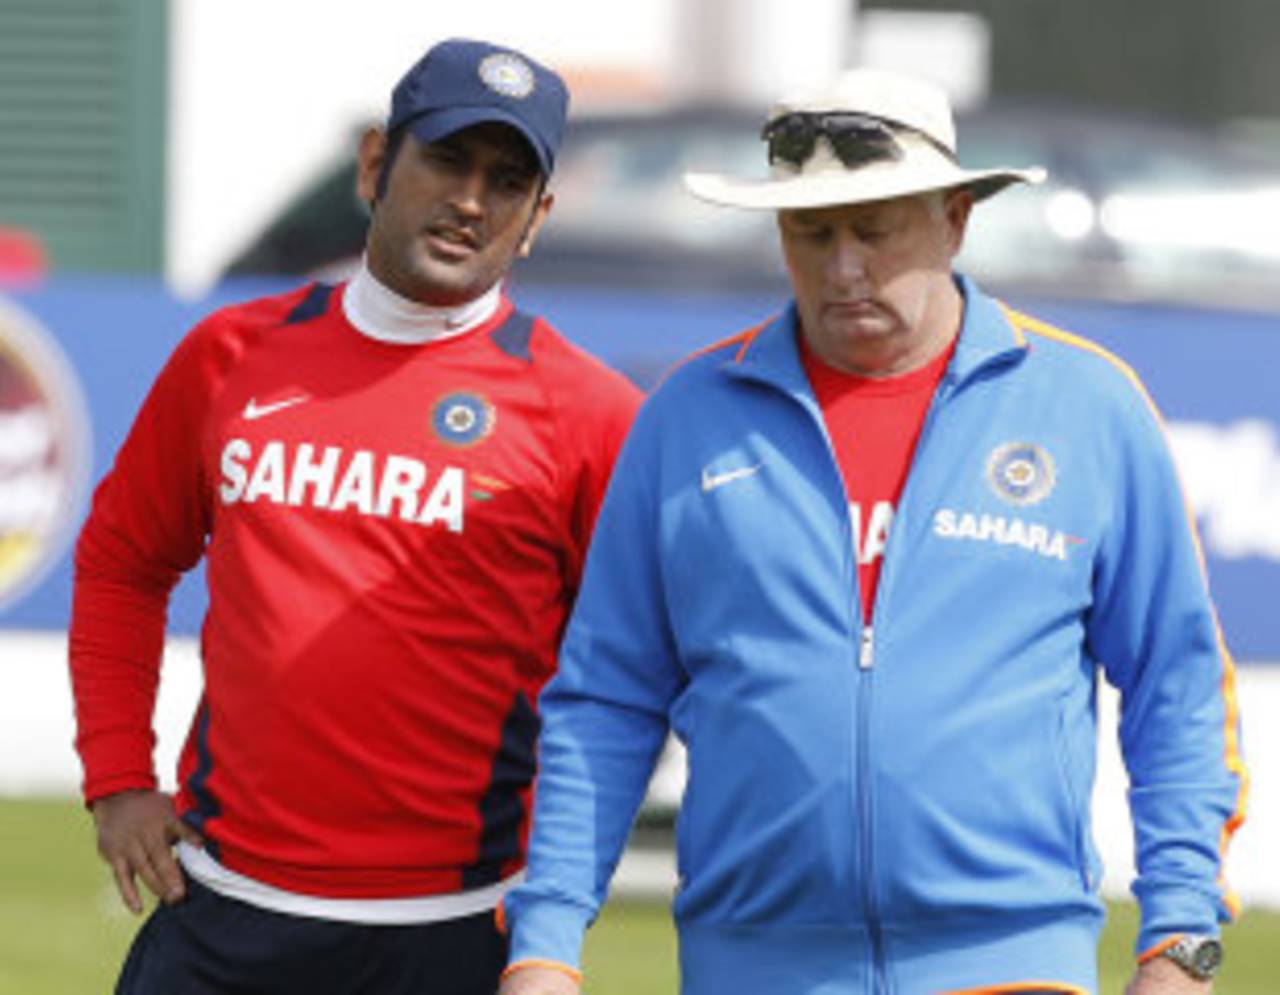 India's captain MS Dhoni and coach Duncan Fletcher share a chat during India's practice session at Lord's July 19 2011